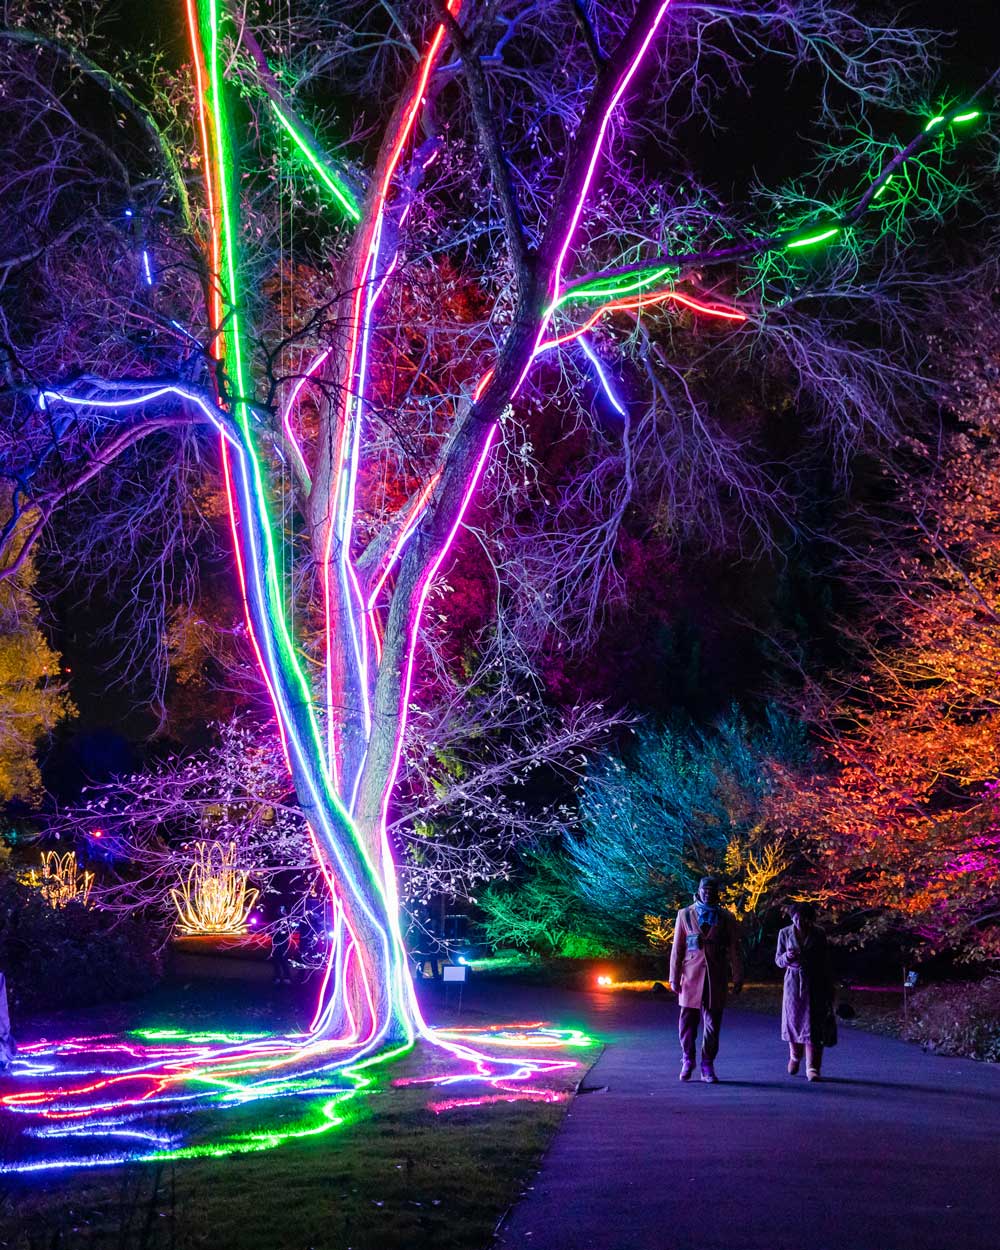 Two people walk on a path next to a large tree illuminated by multicolored ropes of lights.